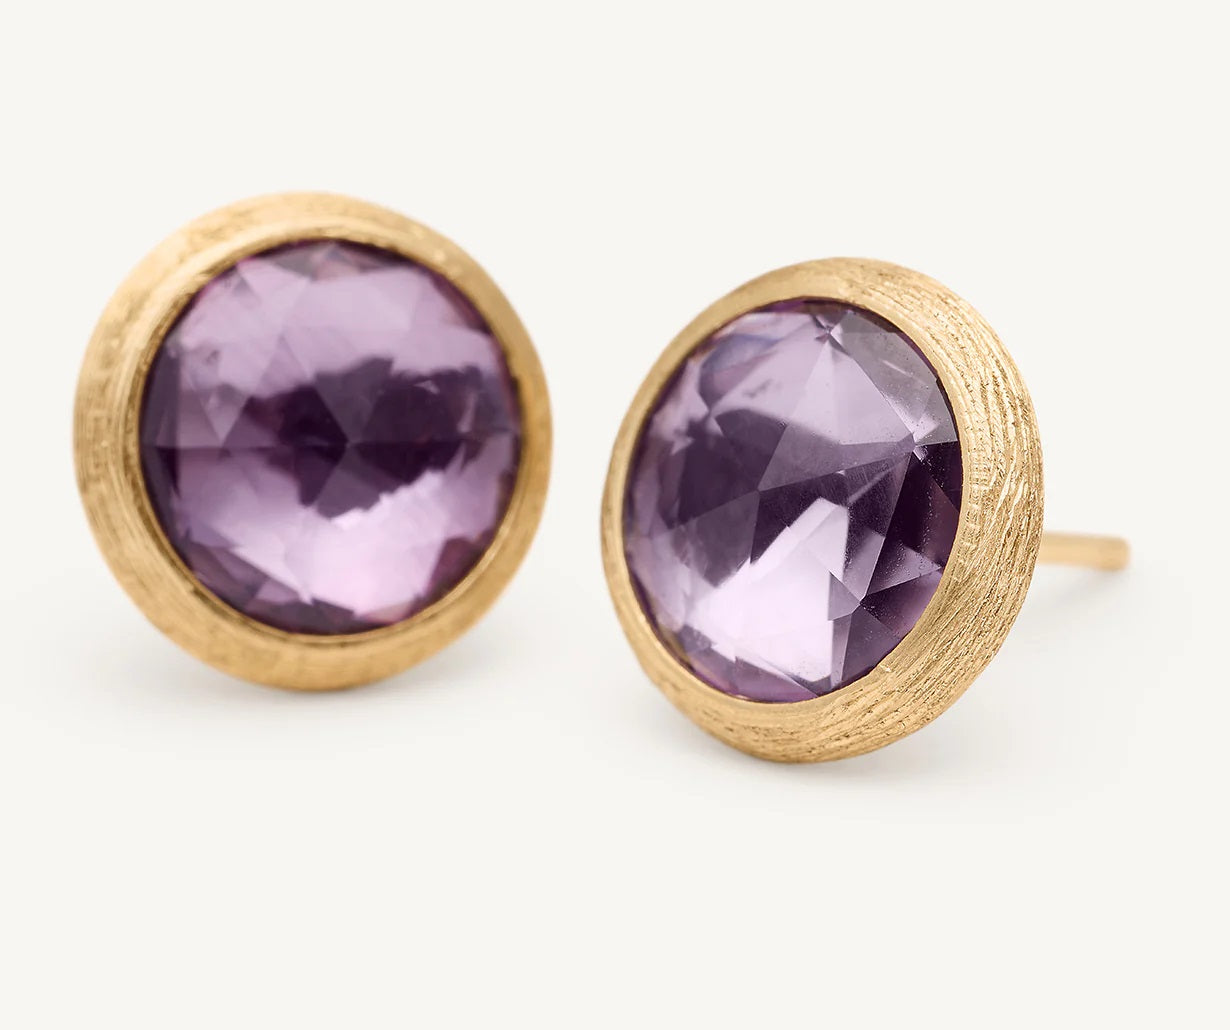 18K YELLOW GOLD AMETHYST STUD EARRINGS FROM THE JAIPUR COLLECTION